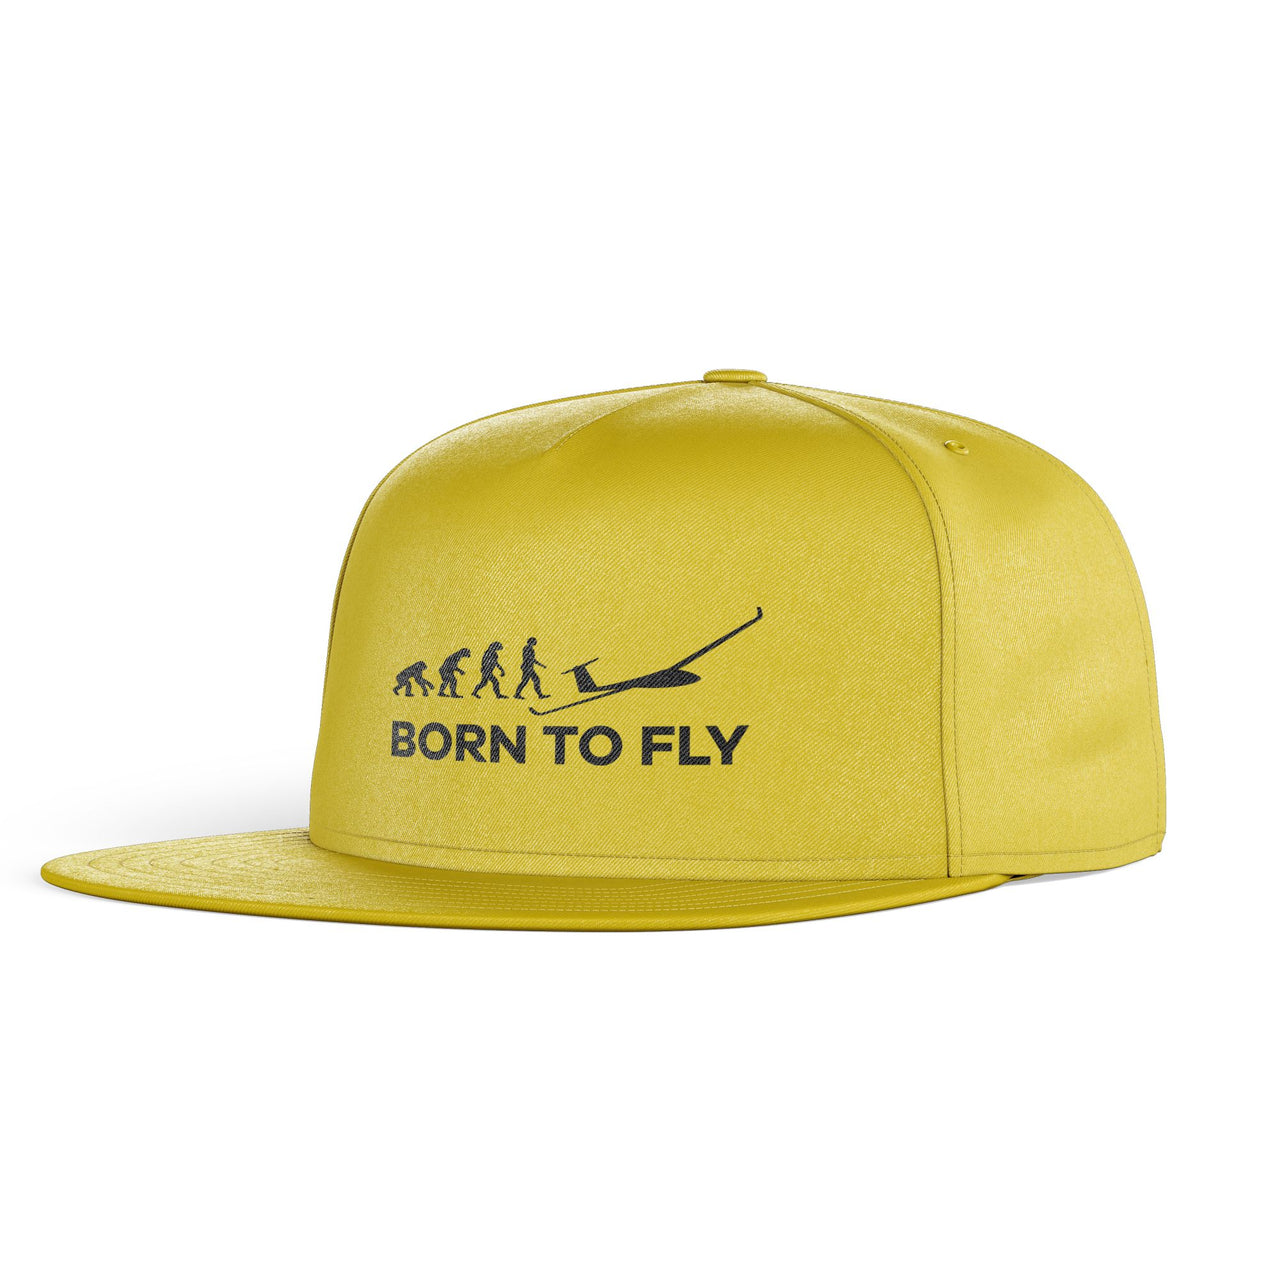 Born To Fly Glider Designed Snapback Caps & Hats